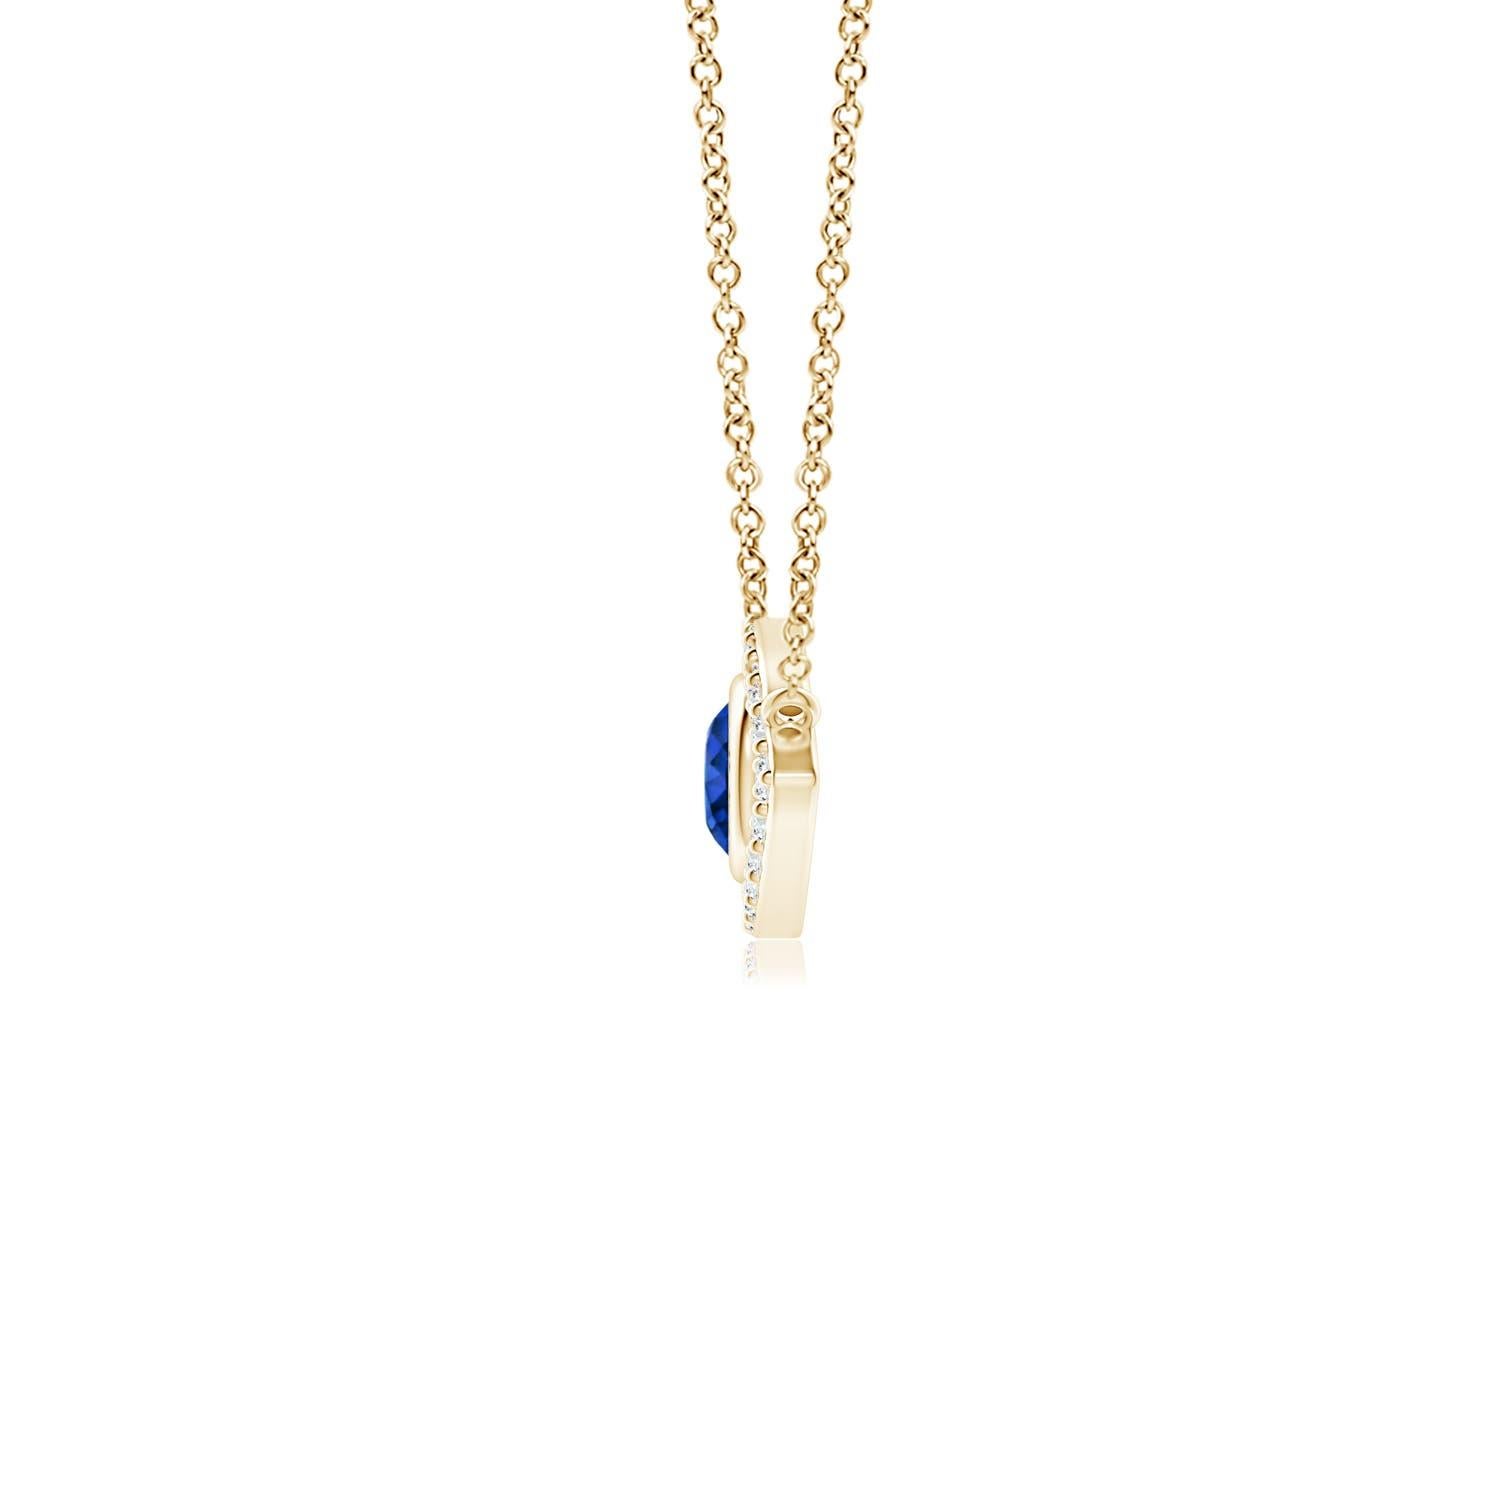 Hanging gracefully from a shiny metal bale is a diamond studded frame with a round sapphire bezel set at the center. The sparkling diamonds create a compelling contrast against the deep blue sapphire. Crafted in 14k yellow gold, this sapphire evil